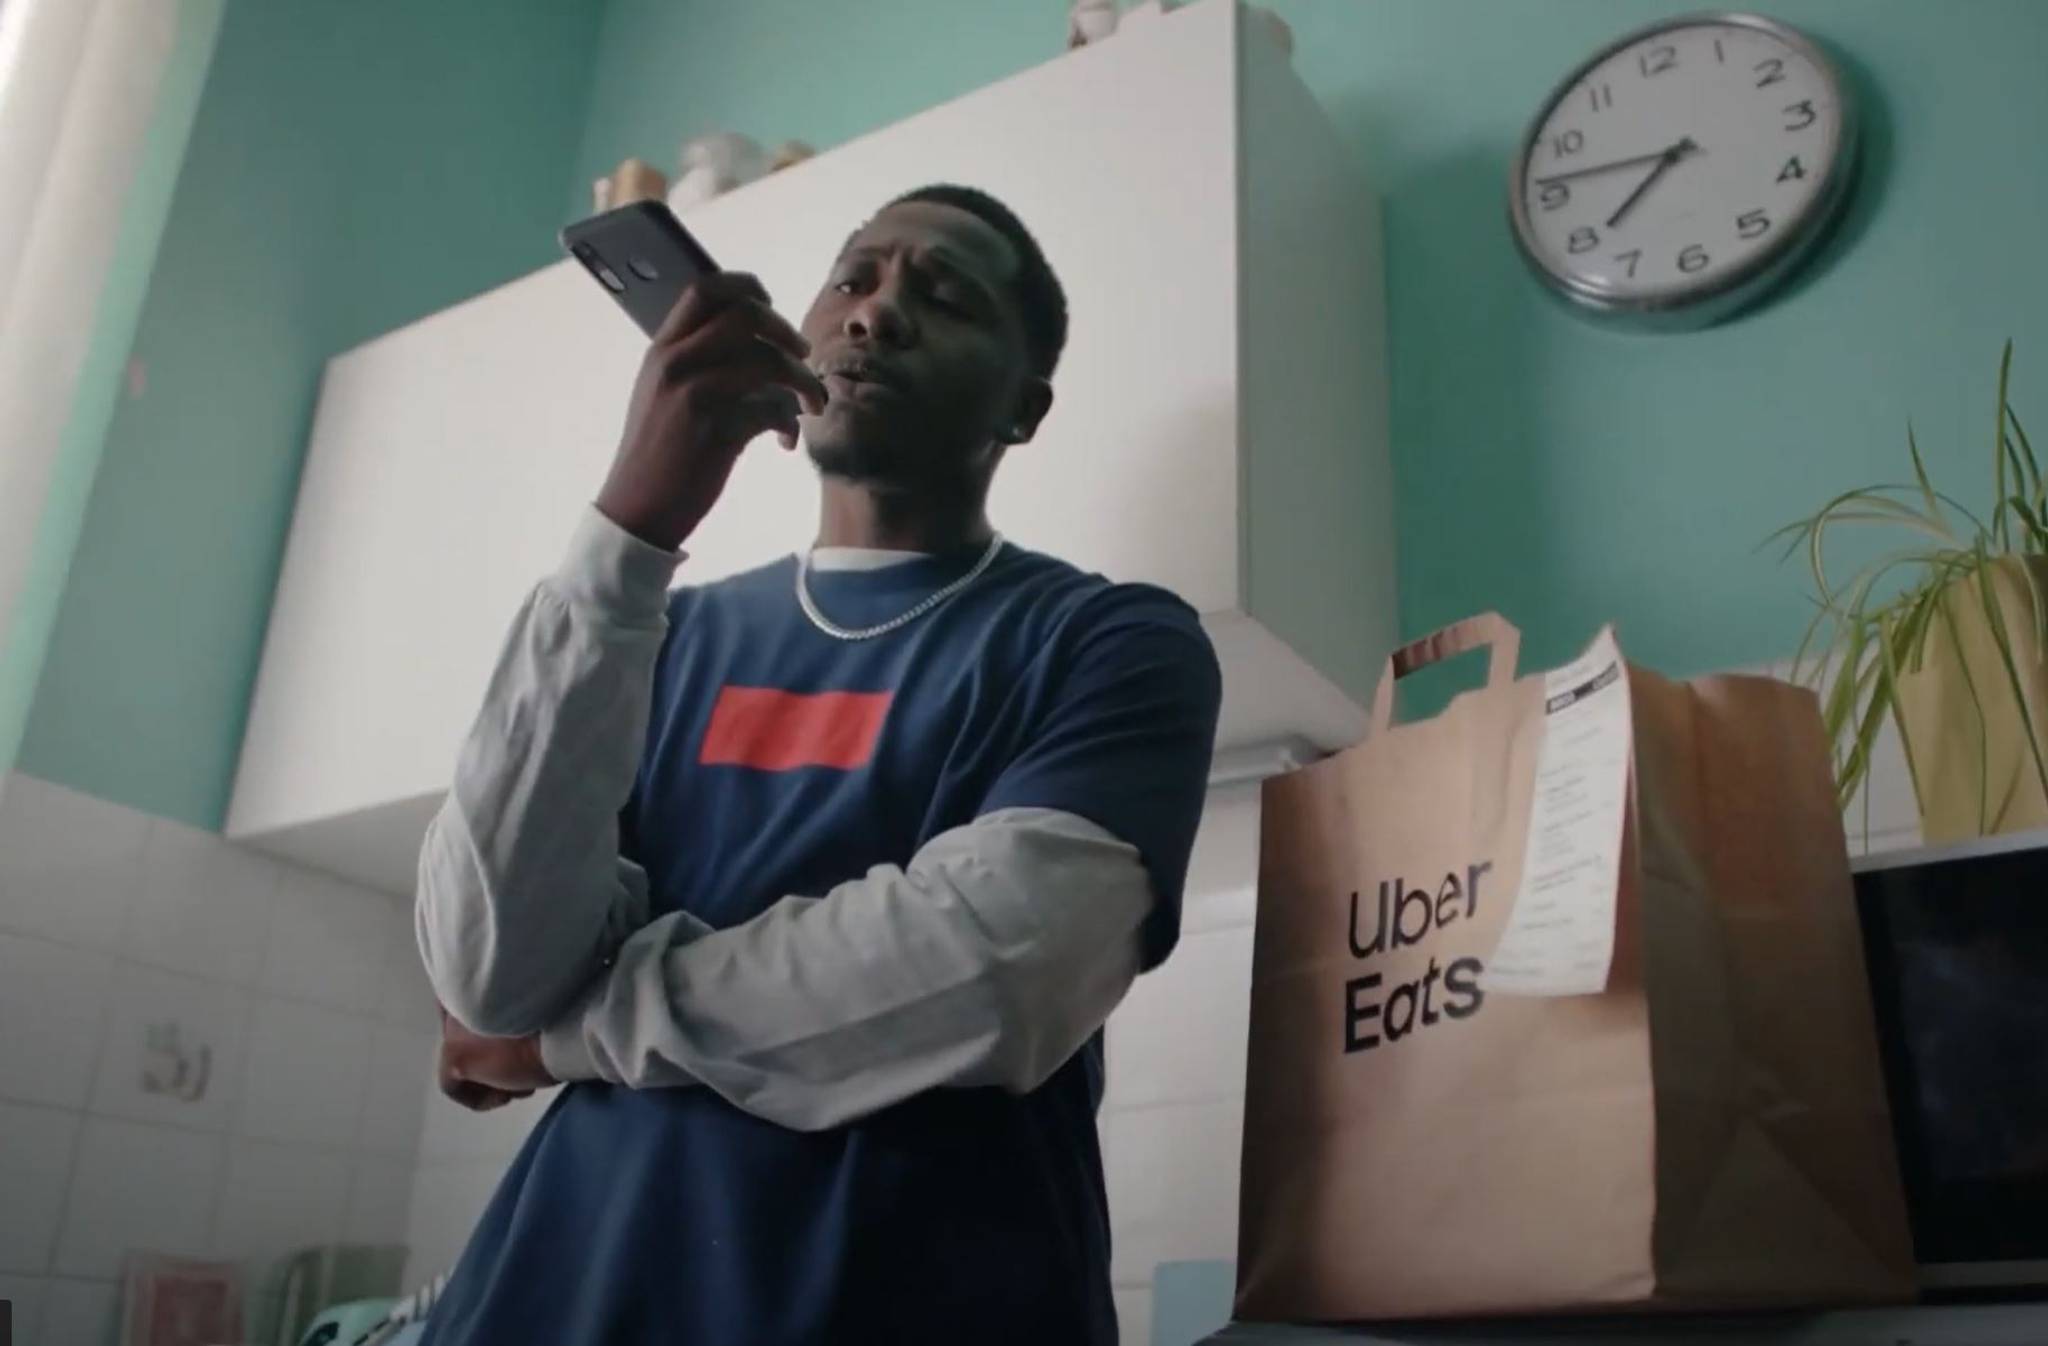 UberEats ad speaks to changing food habits in France